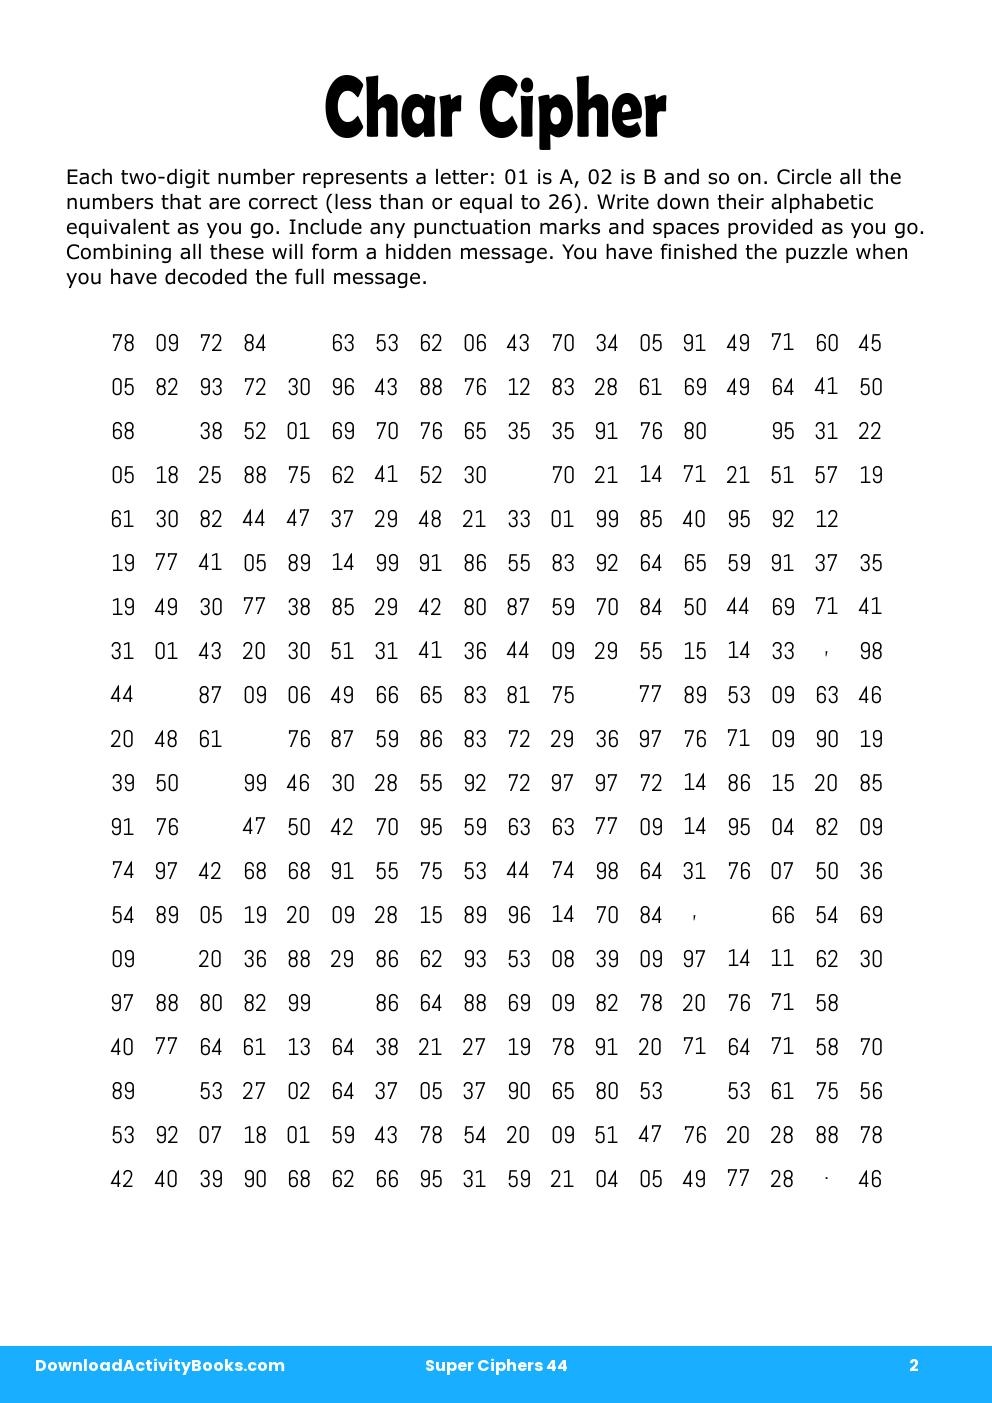 Char Cipher in Super Ciphers 44